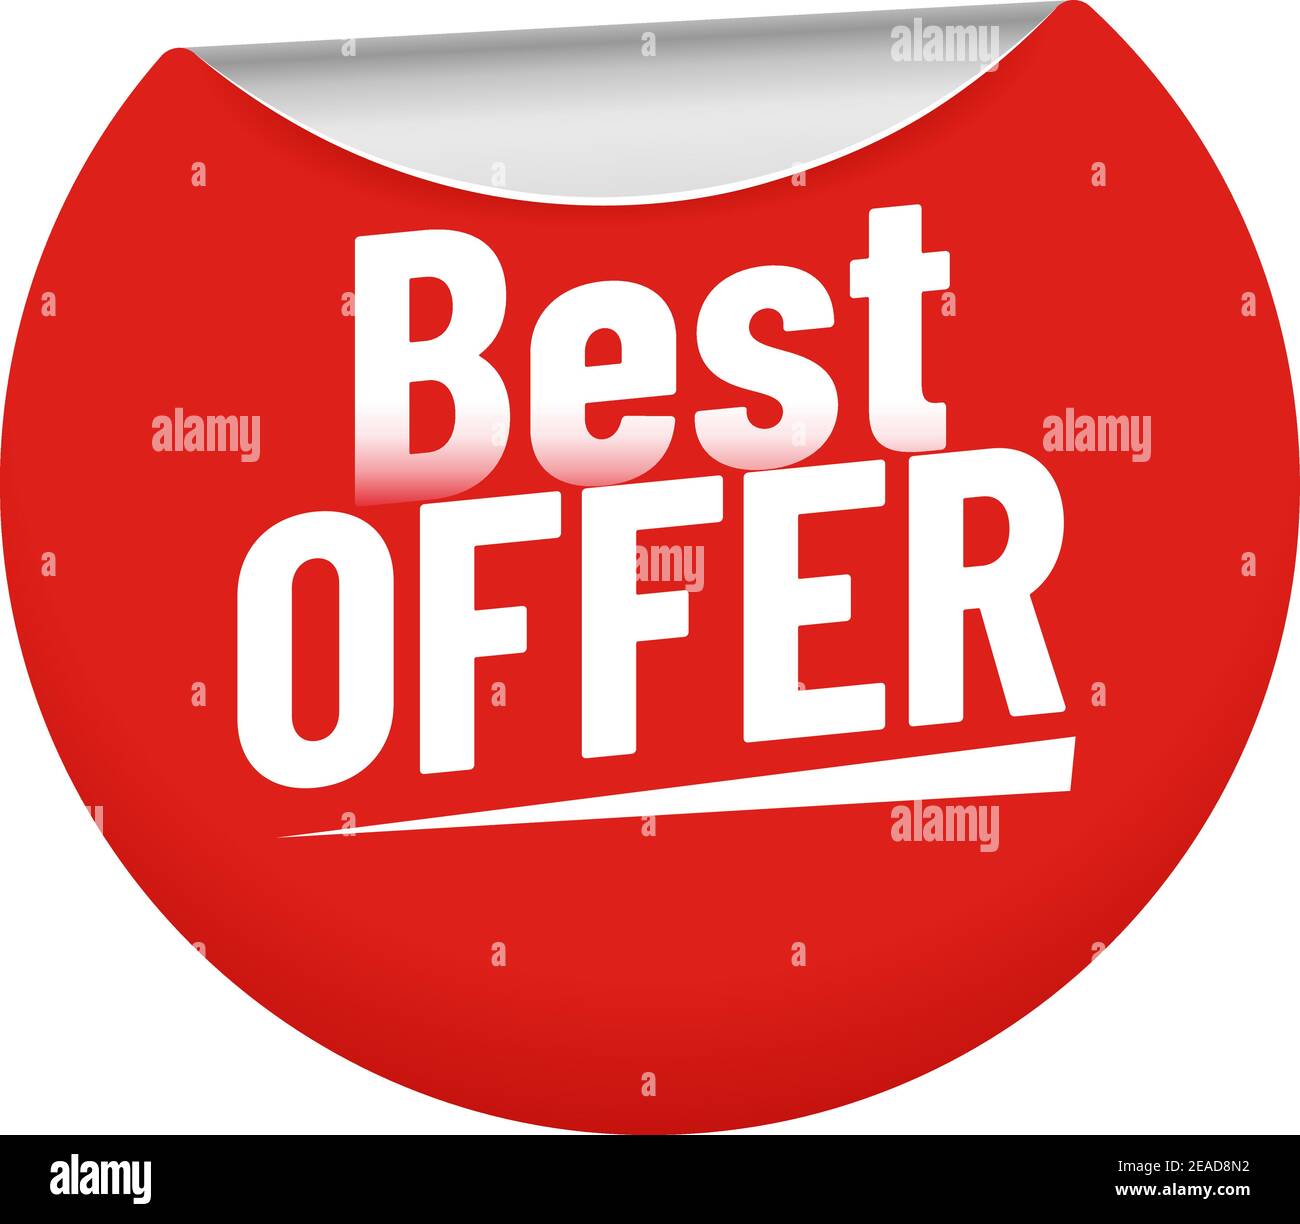 Best offer sticker. Red badge with bent edge and discount prices. Sticky circle element for promotion Stock Vector